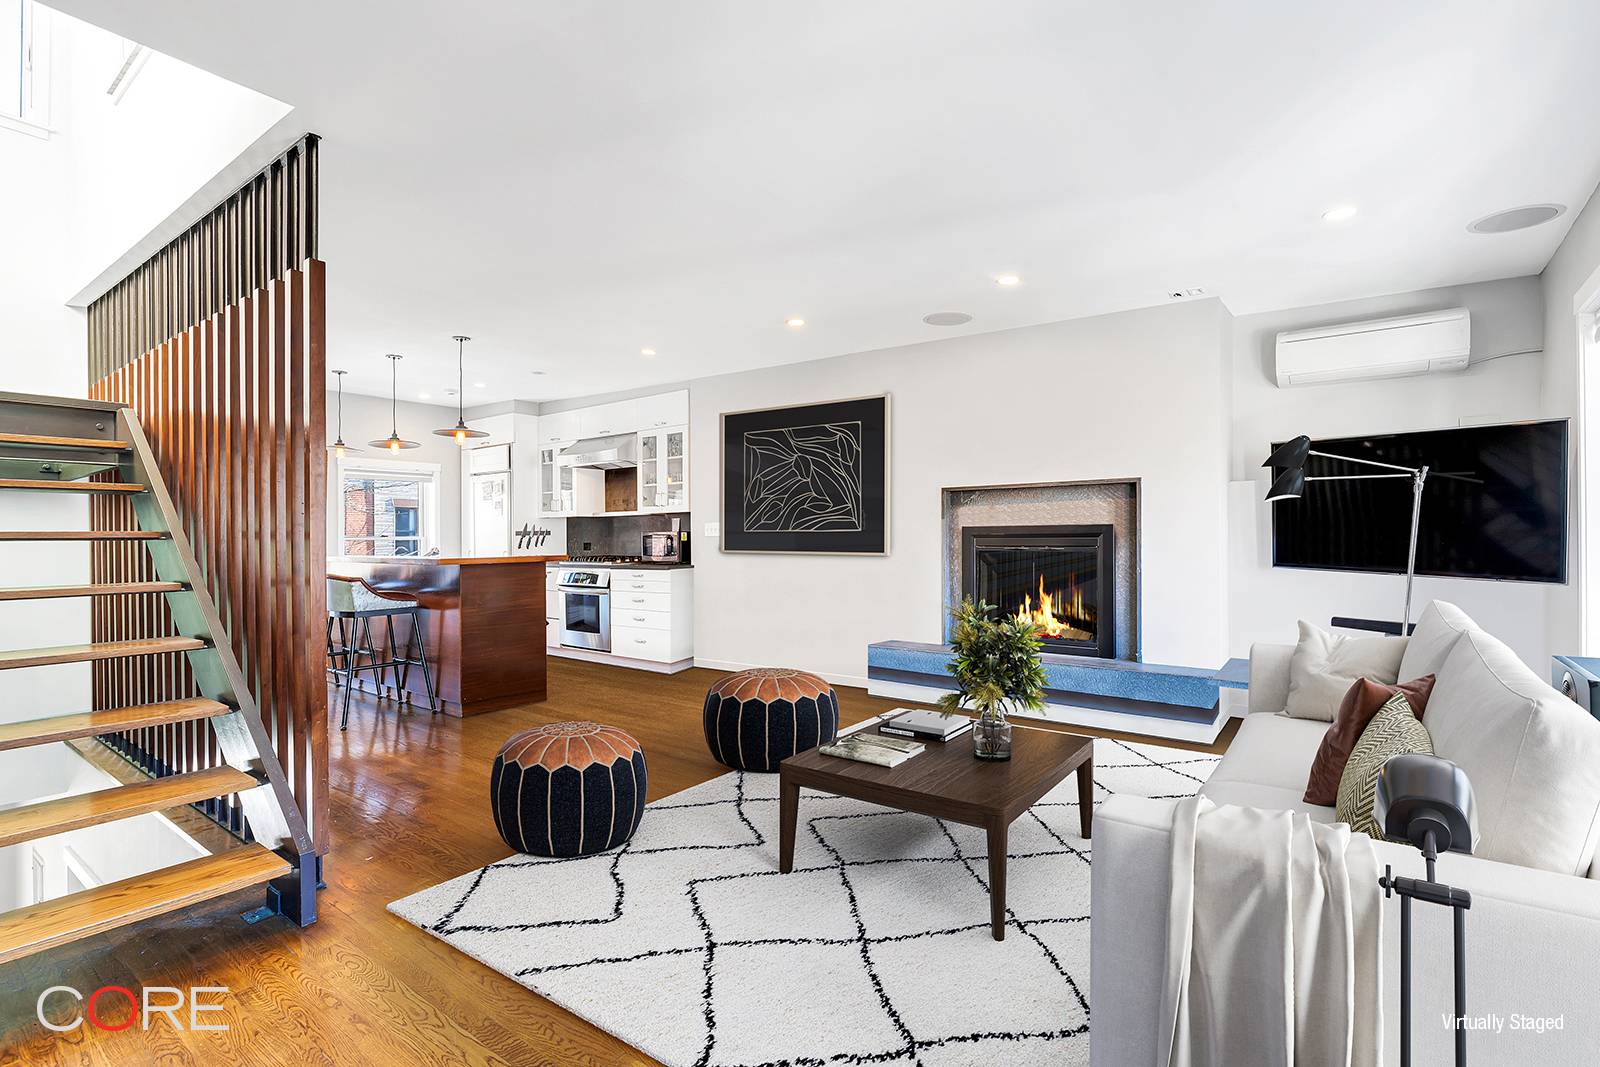 Prime Williamsburg a Architect Designed, Perfectly Turnkey Renovated Townhouse 154 Wythe is a 20 foot wide townhouse that has recently been completely gut renovated by Brooklyn based CWB Architects.